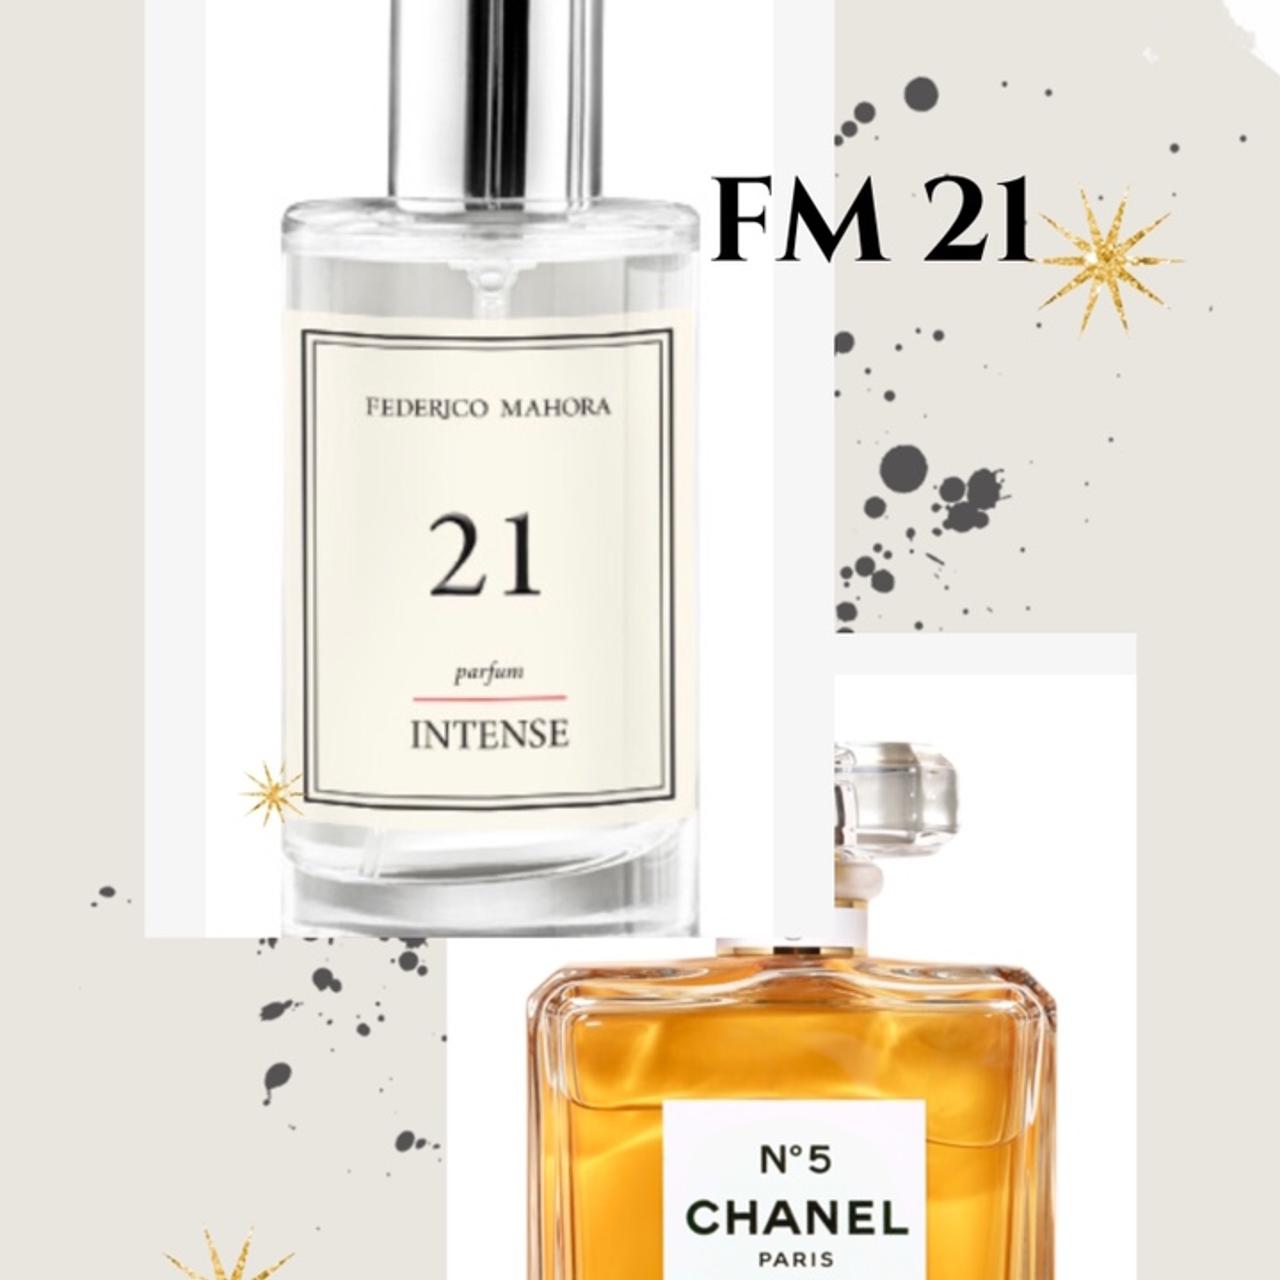 Chanel No5 50ml, FM 21 is similar to Chanel 